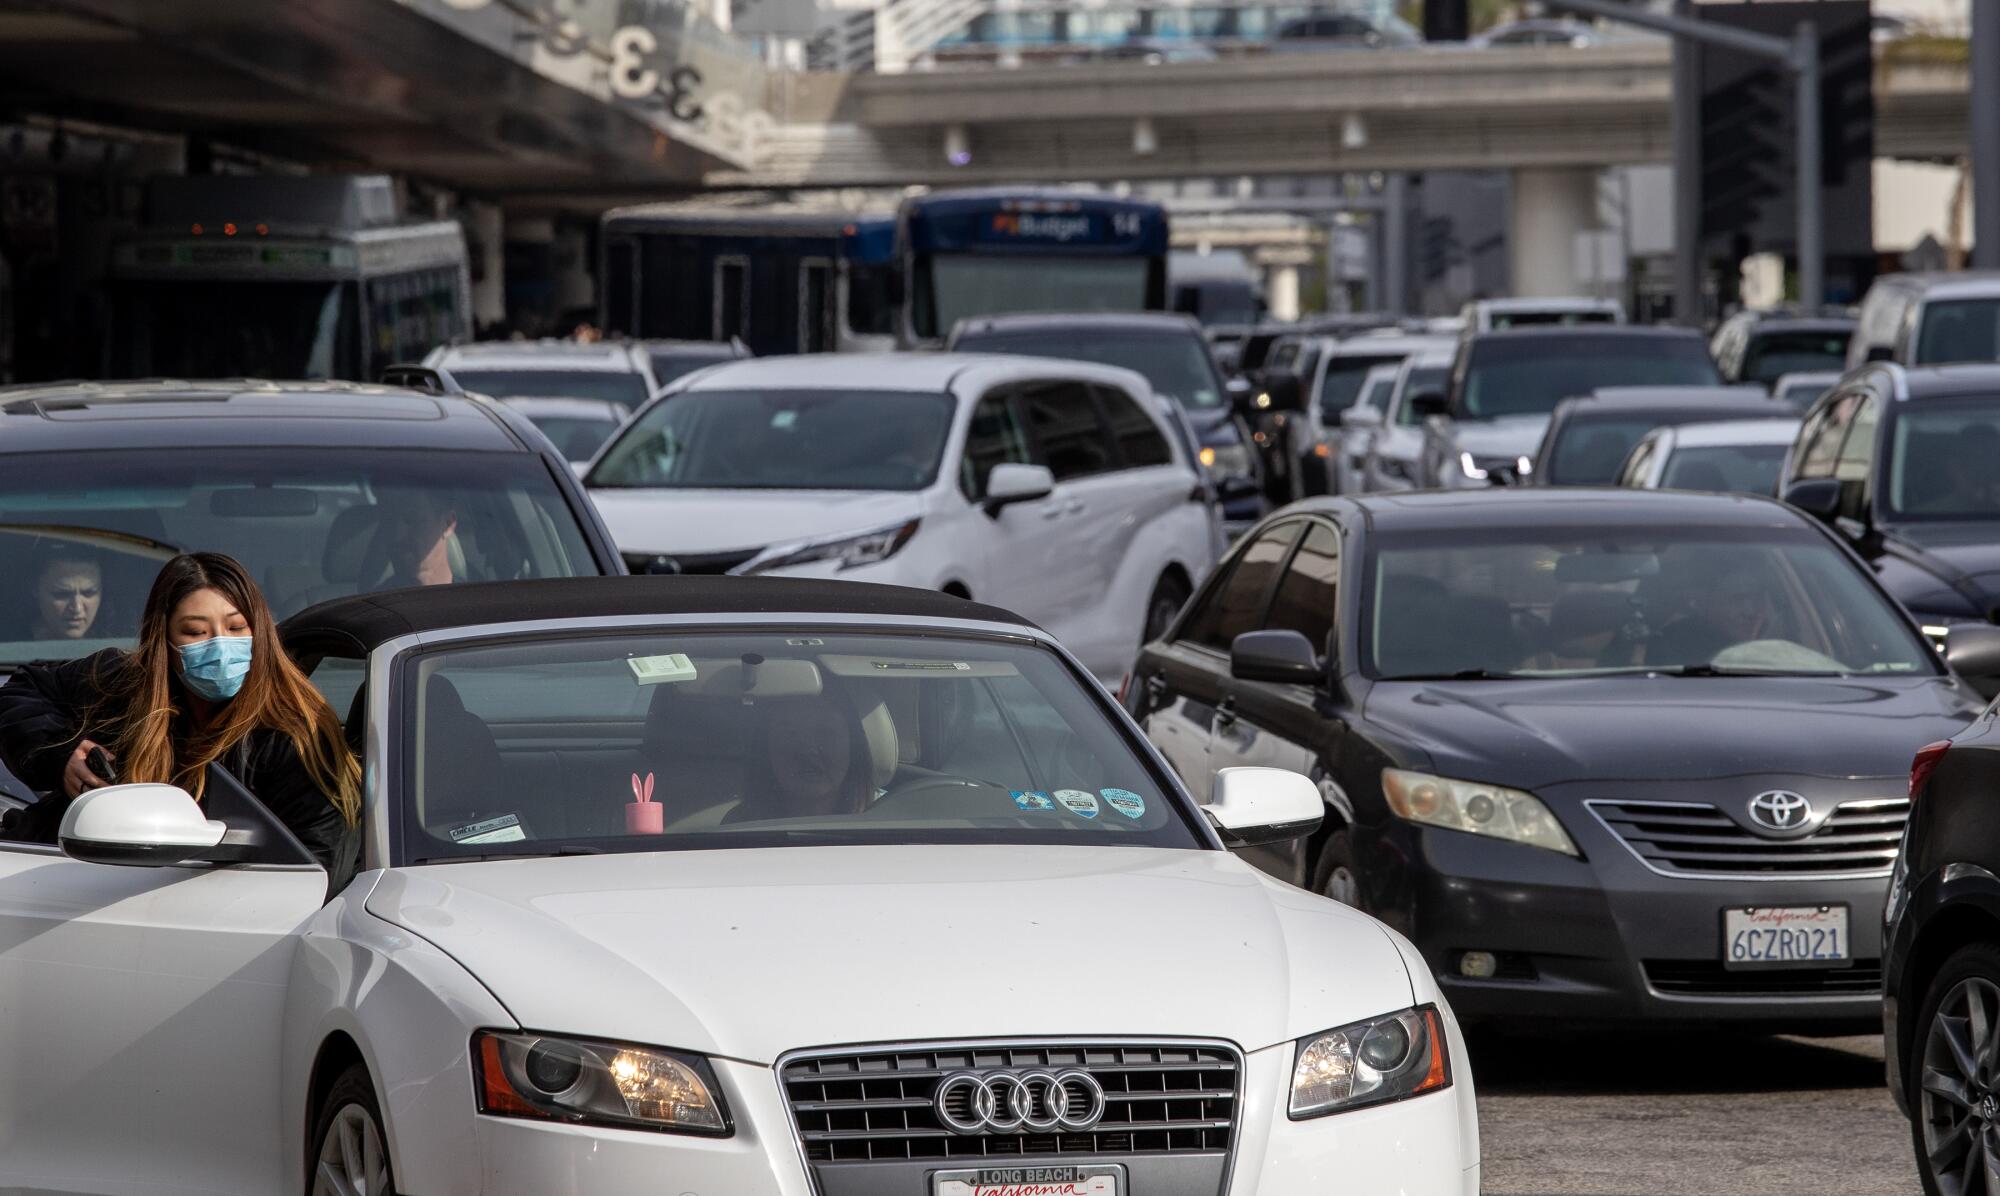 Many vehicles fill the road around Los Angeles International Airport.